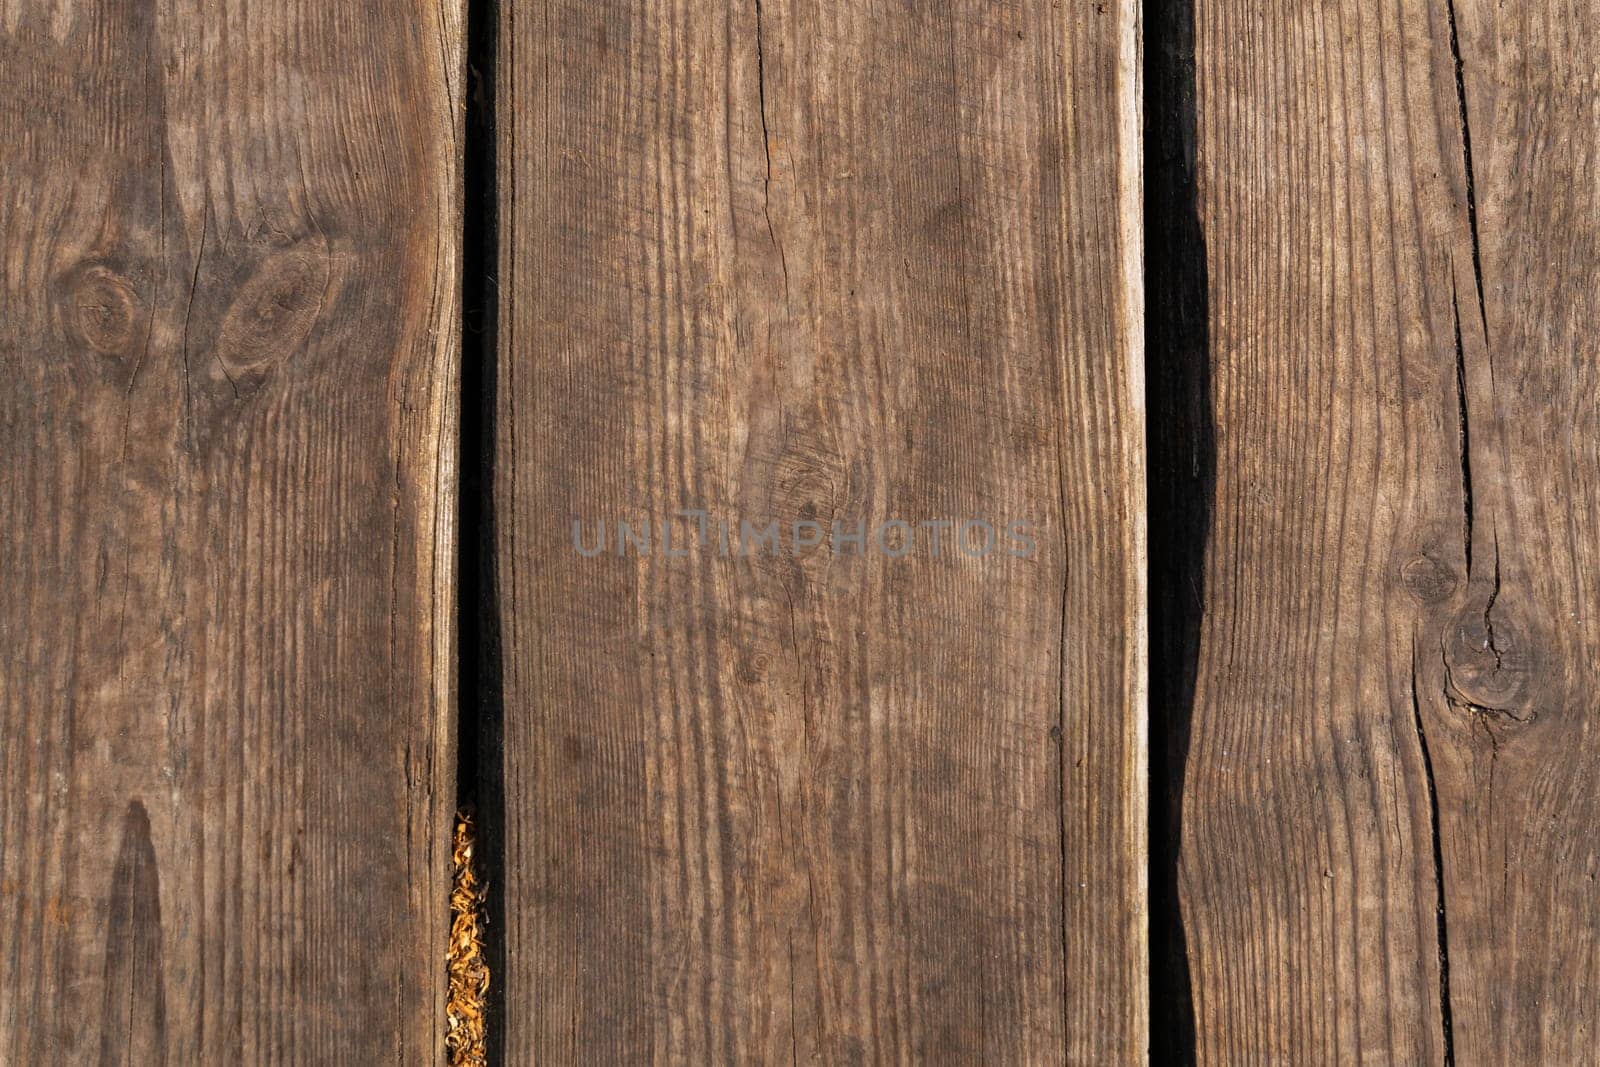 Brown scratched wood texture, old background, wooden planks. Old wood texture, close-up